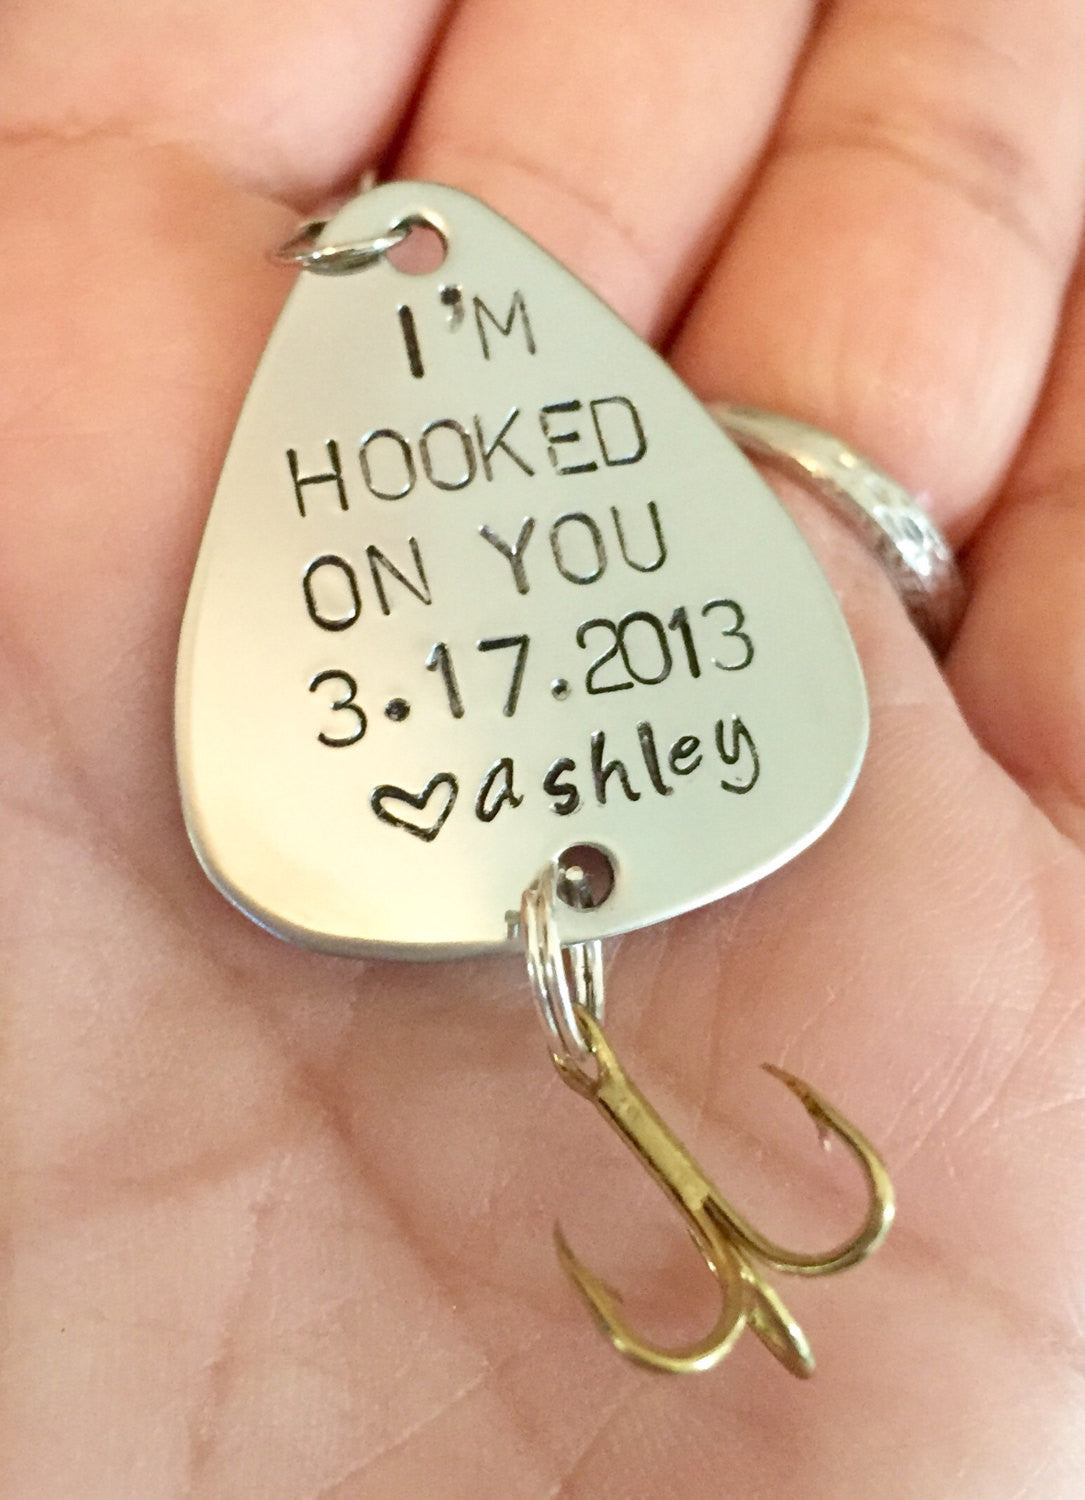 Fishing Lure, Fishing, I'm Hooked On You,Boyfriend Gift, Lure, Fishing Lures, Father Day, Gifts Men, Gifts Boyfriend,natashaaloha - Natashaaloha, jewelry, bracelets, necklace, keychains, fishing lures, gifts for men, charms, personalized, 